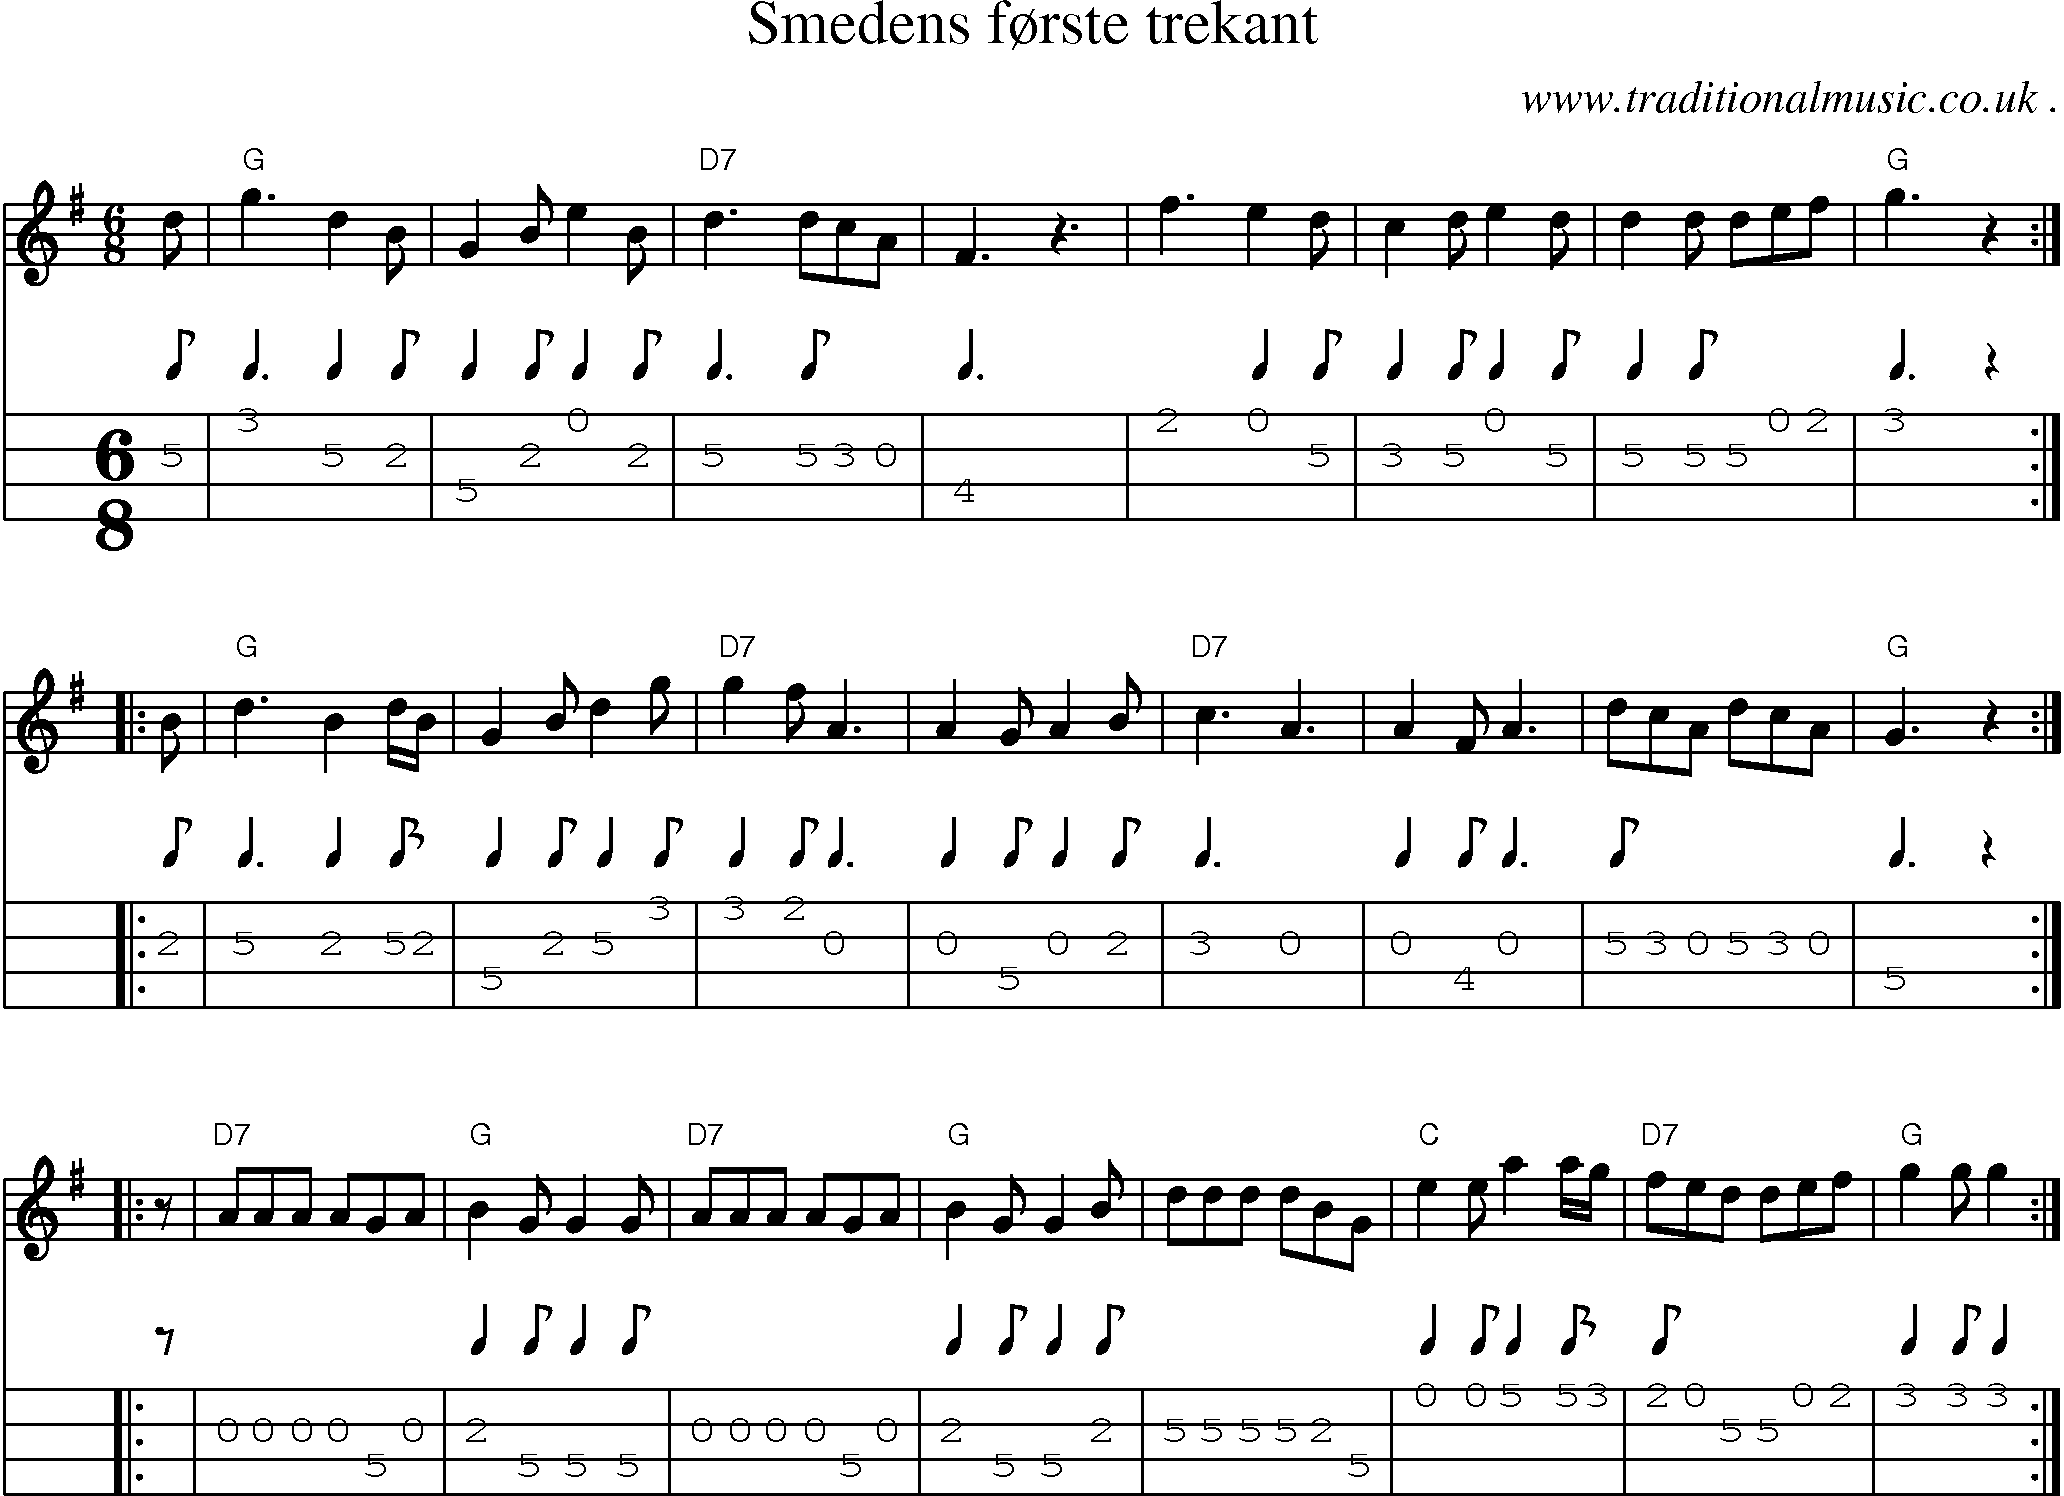 Sheet-music  score, Chords and Mandolin Tabs for Smedens Forste Trekant